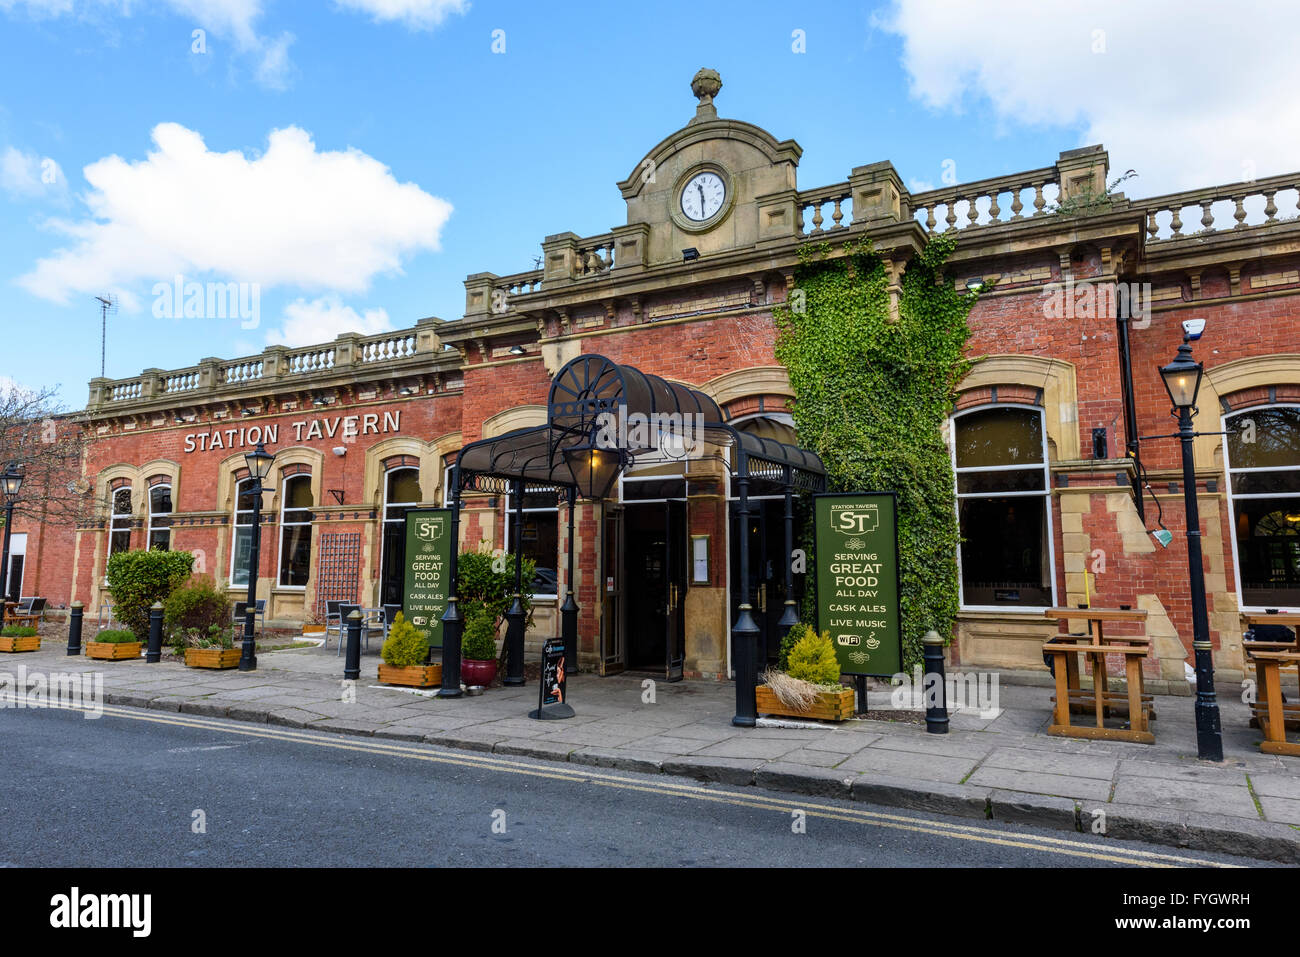 View of the front of the old railway station building in Lytham, Lancashire converted into a restaurant and bar Stock Photo